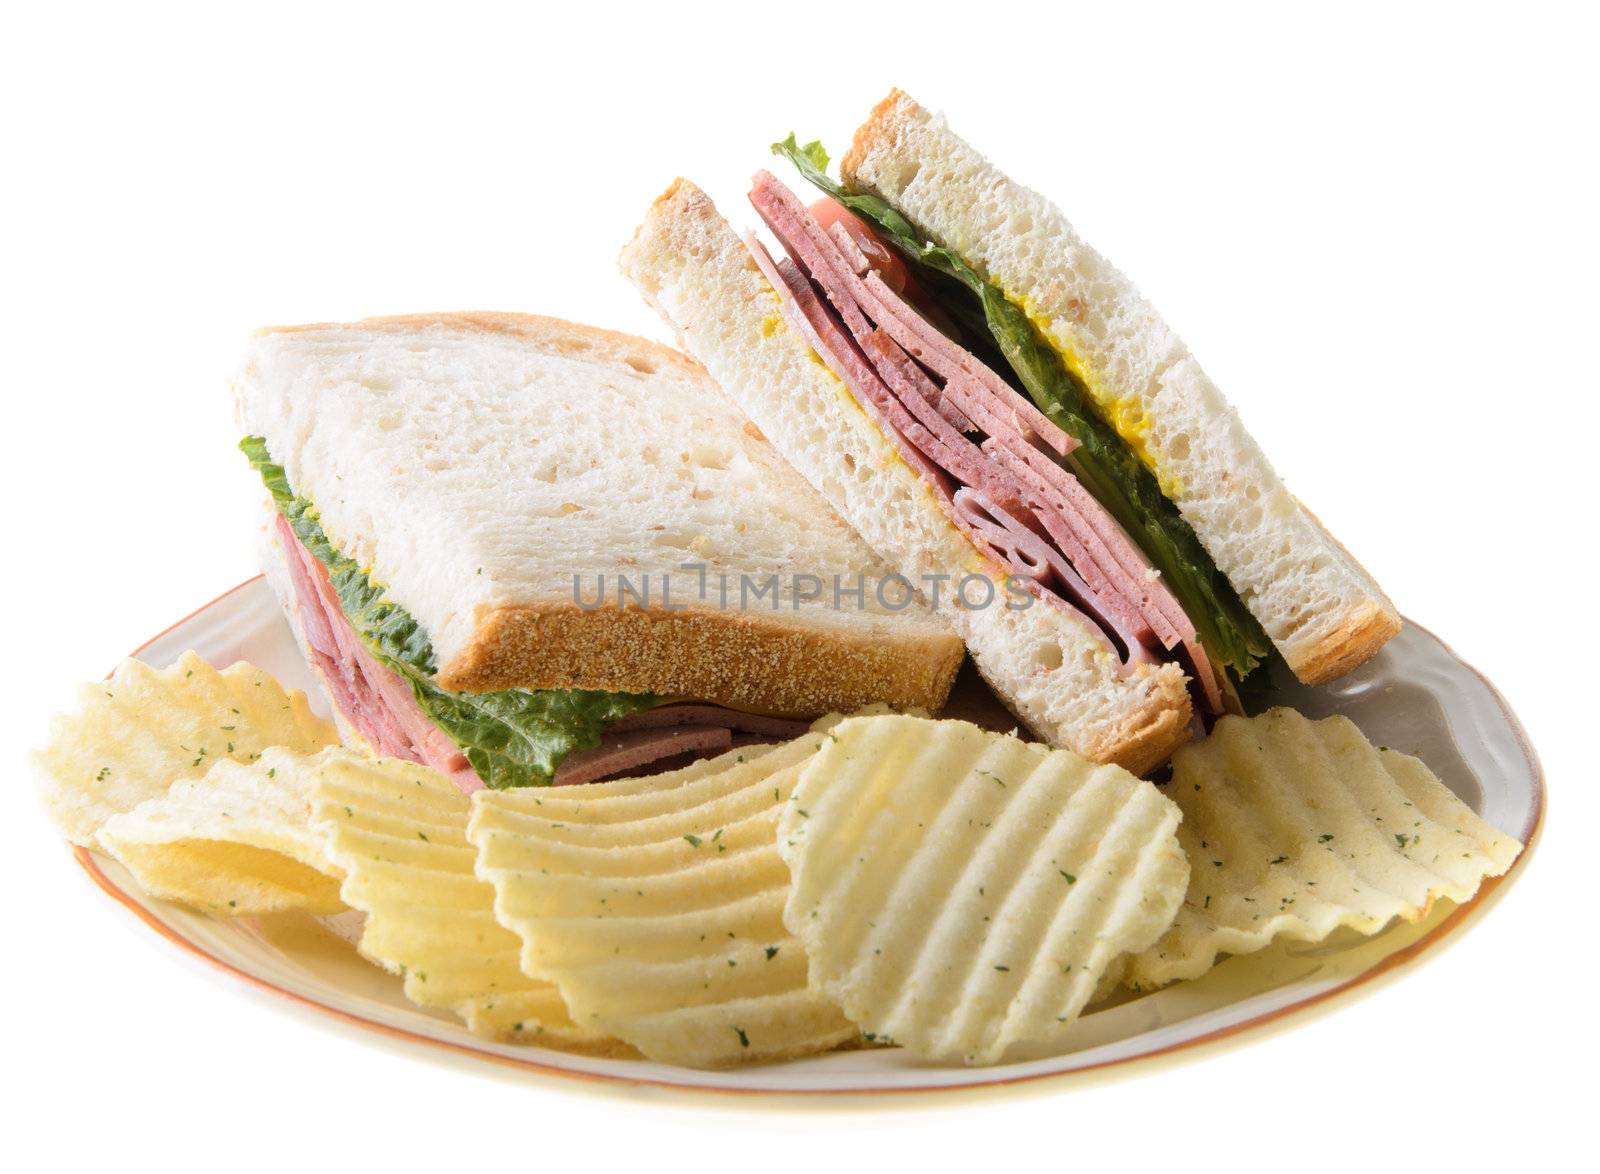 Bologna sandwich with potato chips, isolated on a white background.